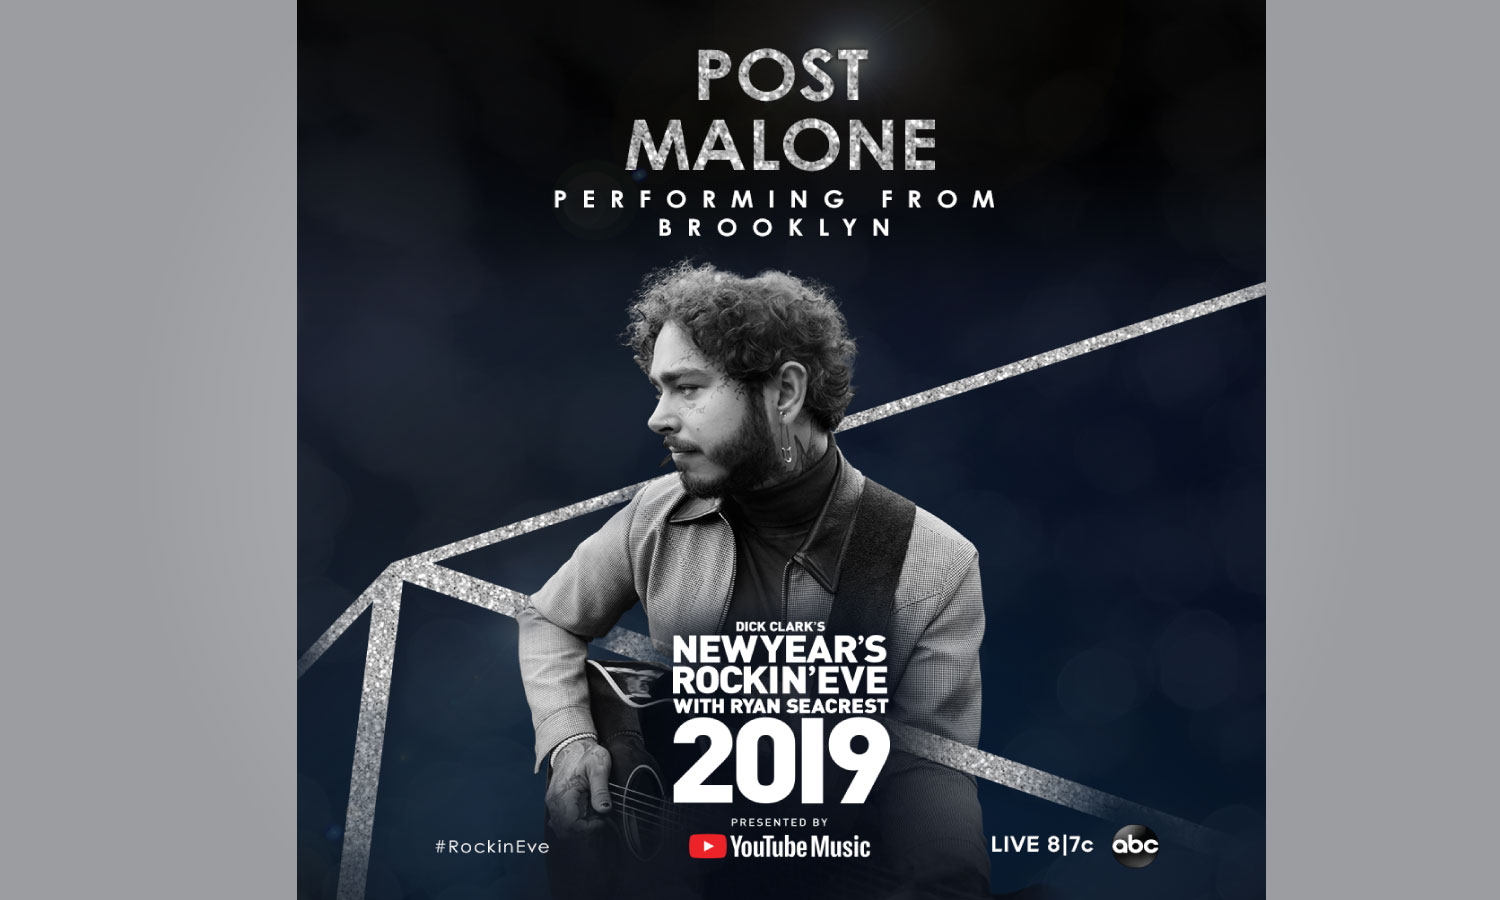 Post Malone to Perform on New Year’s Rockin’ Eve with Ryan Seacrest